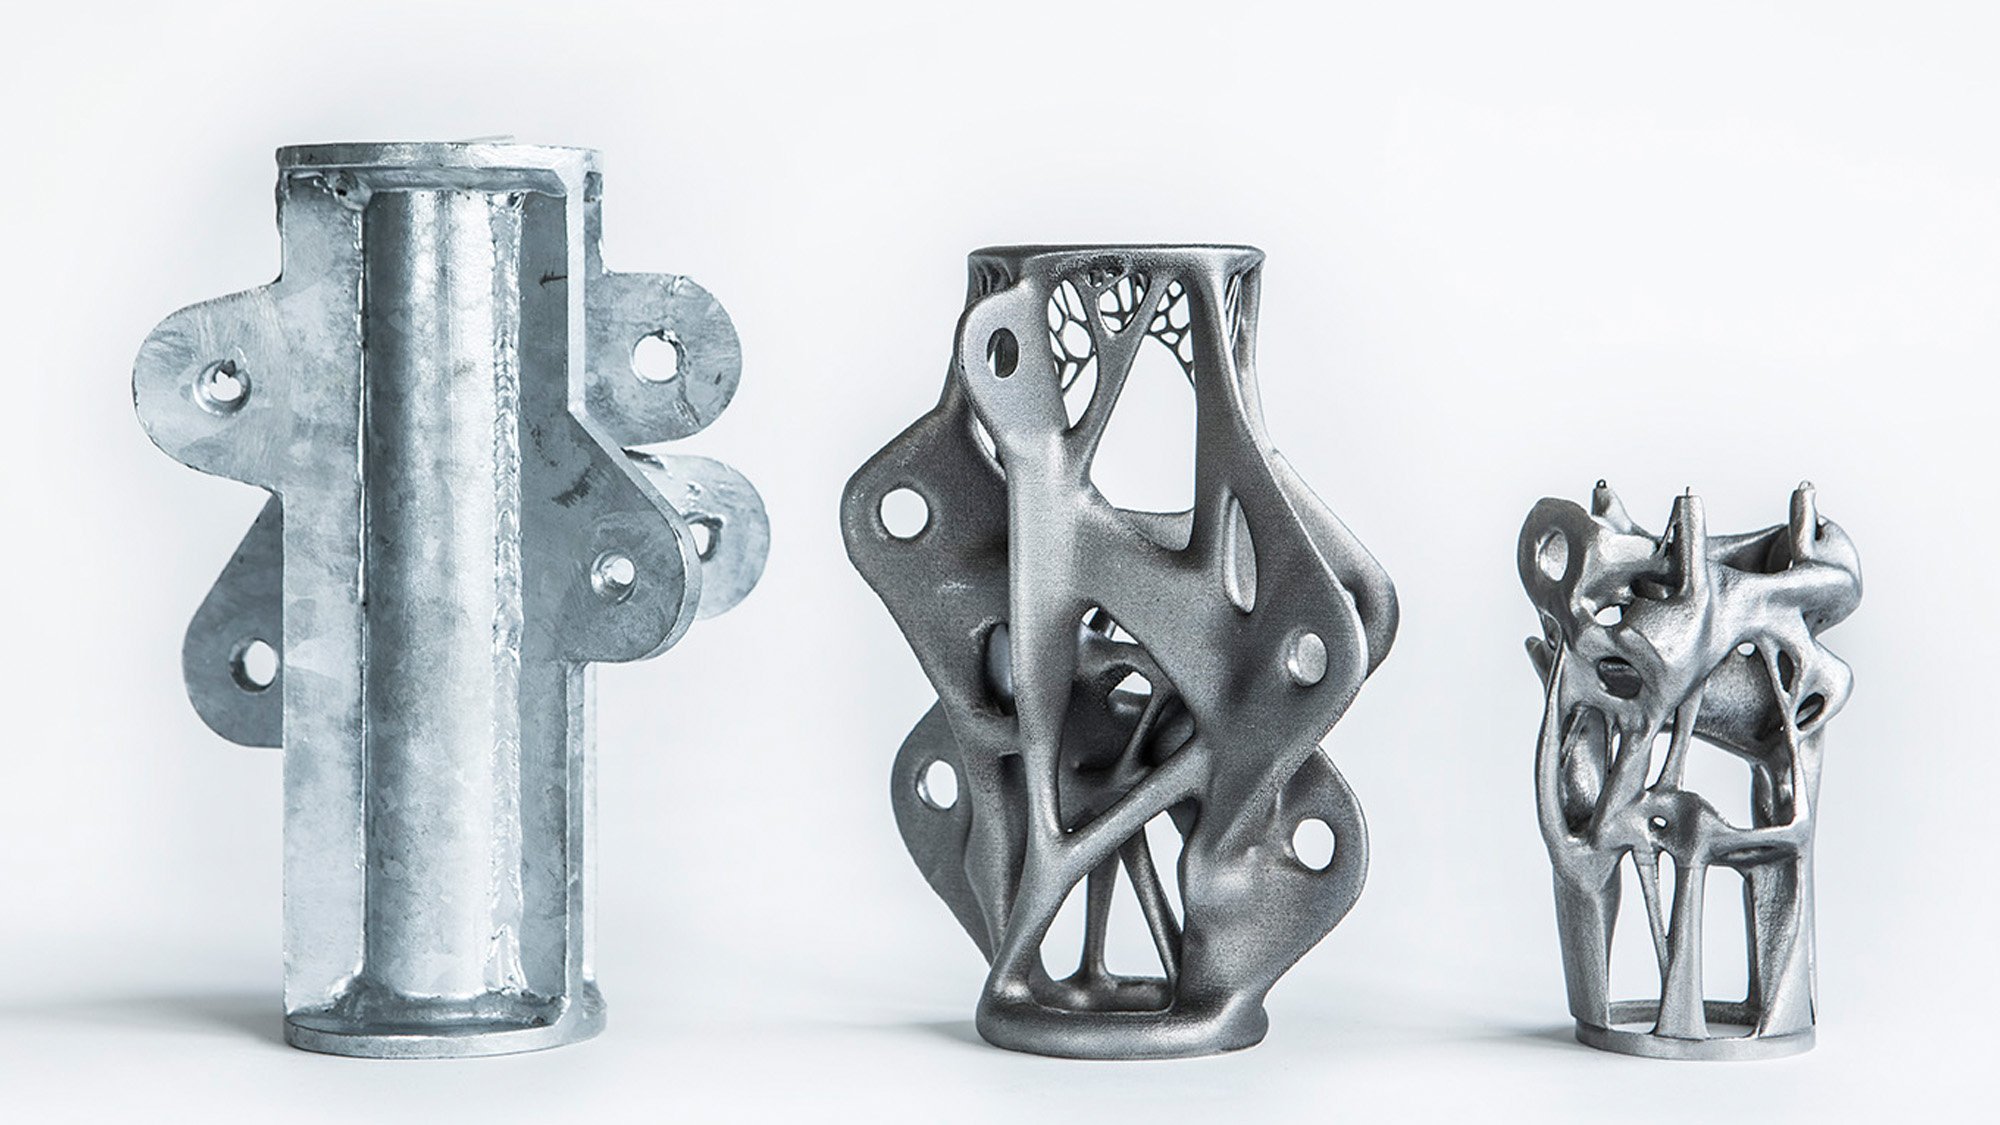  a side by side comparison of 3 different 3D printed structural elements in varying complexity